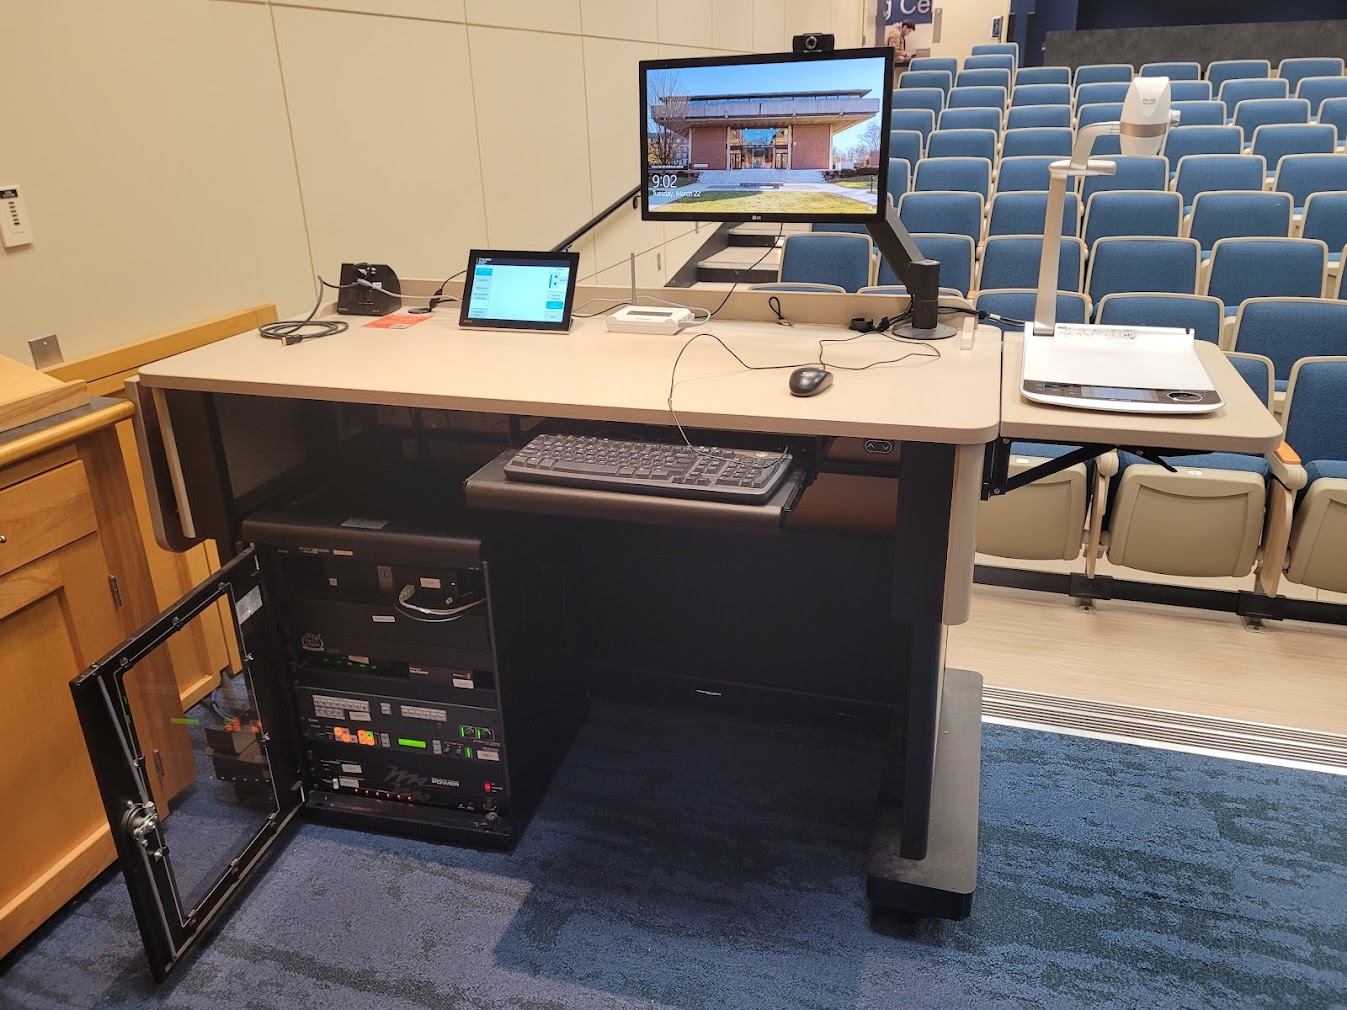 A view of the open cabinet with a computer monitor, HDMI input, a touch panel controller, document camera, audio visual rack and electric screen controls.